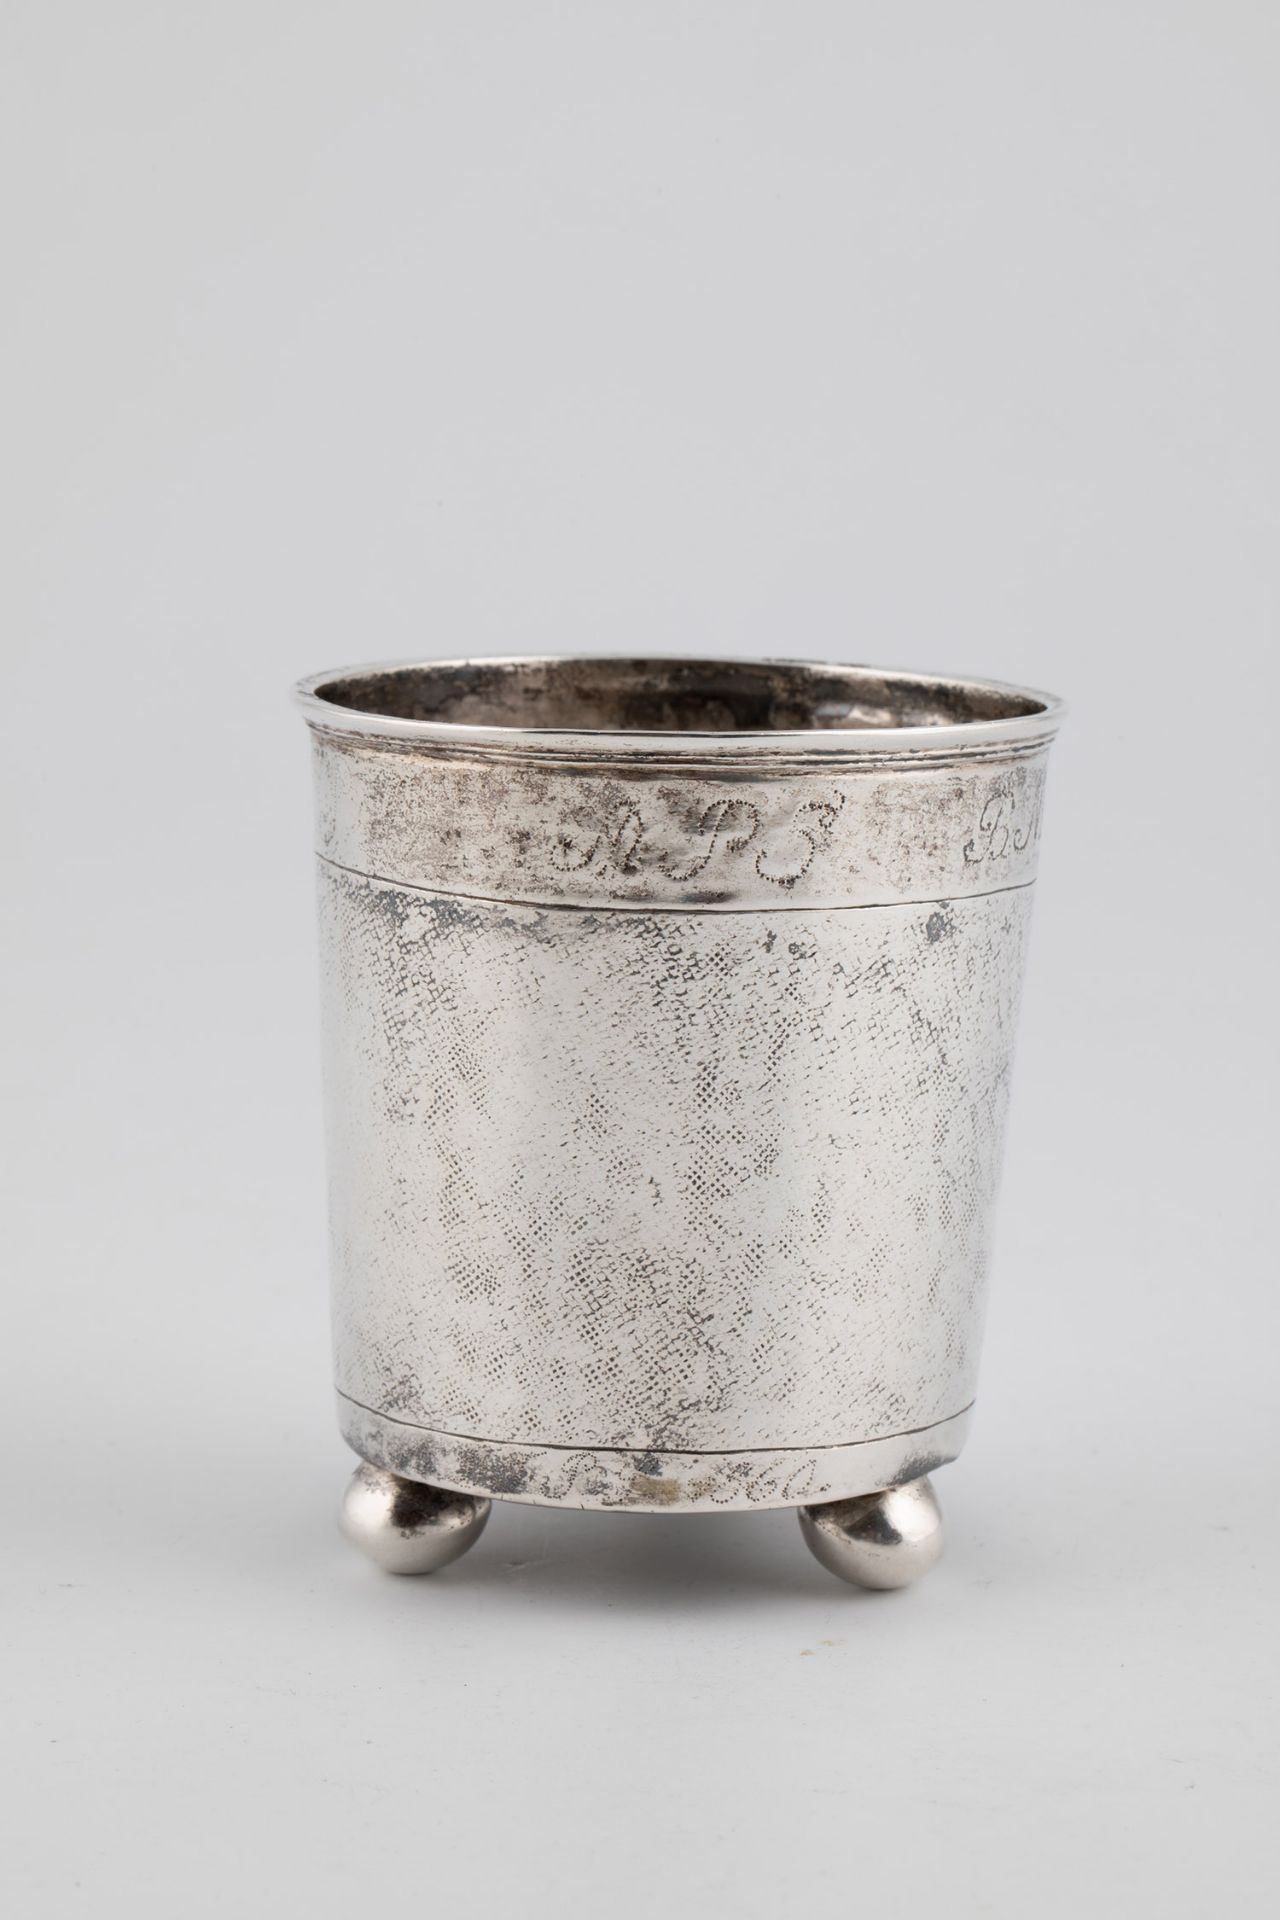 Snakeskin cup - Image 2 of 4